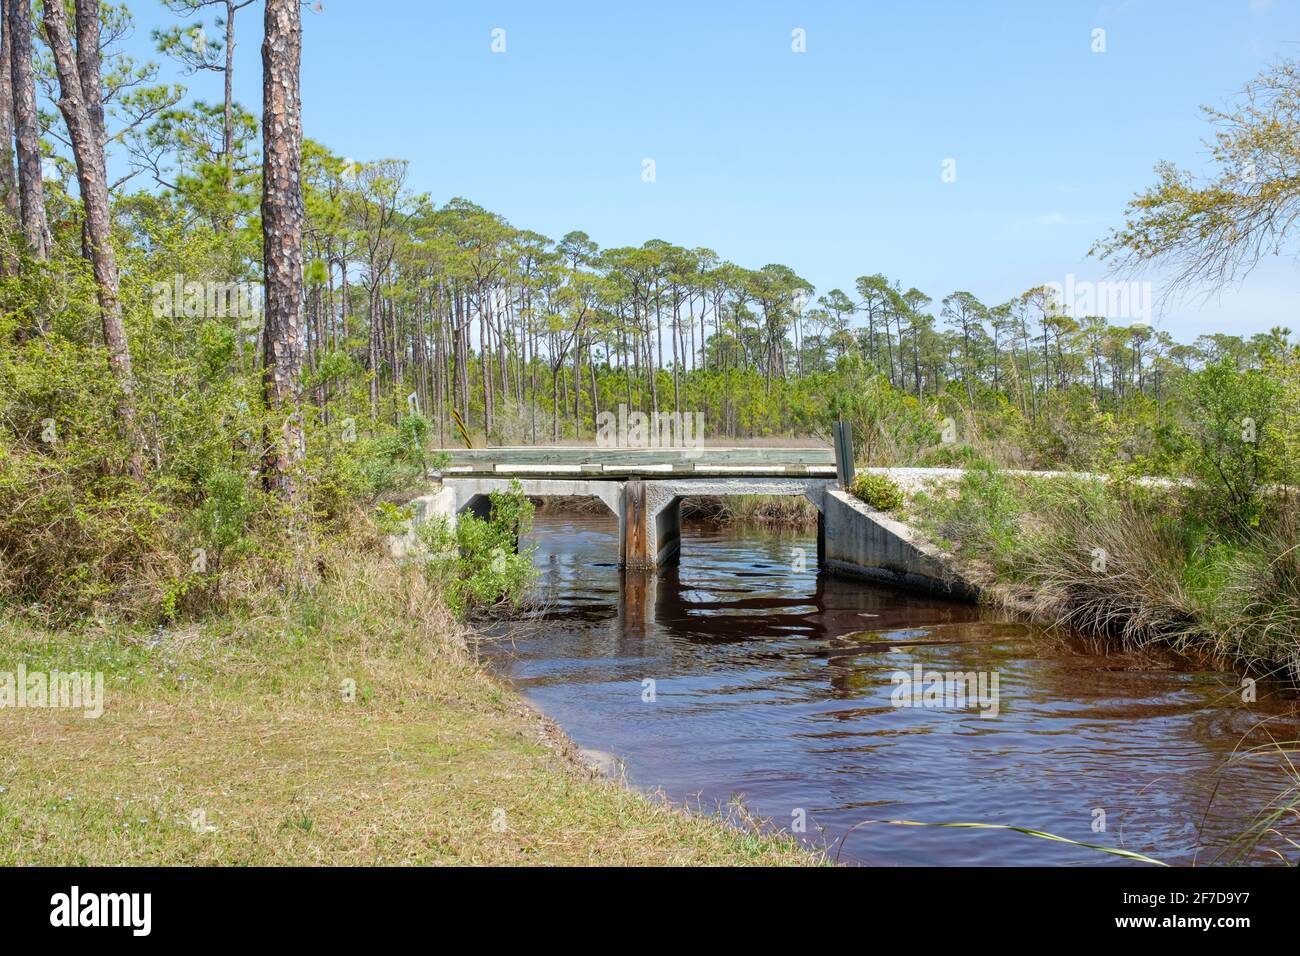 Bridge over water and edge of pine forest in Bon Secour National Wildlife Refuge in Gulf Shores, Alabama, USA Stock Photo